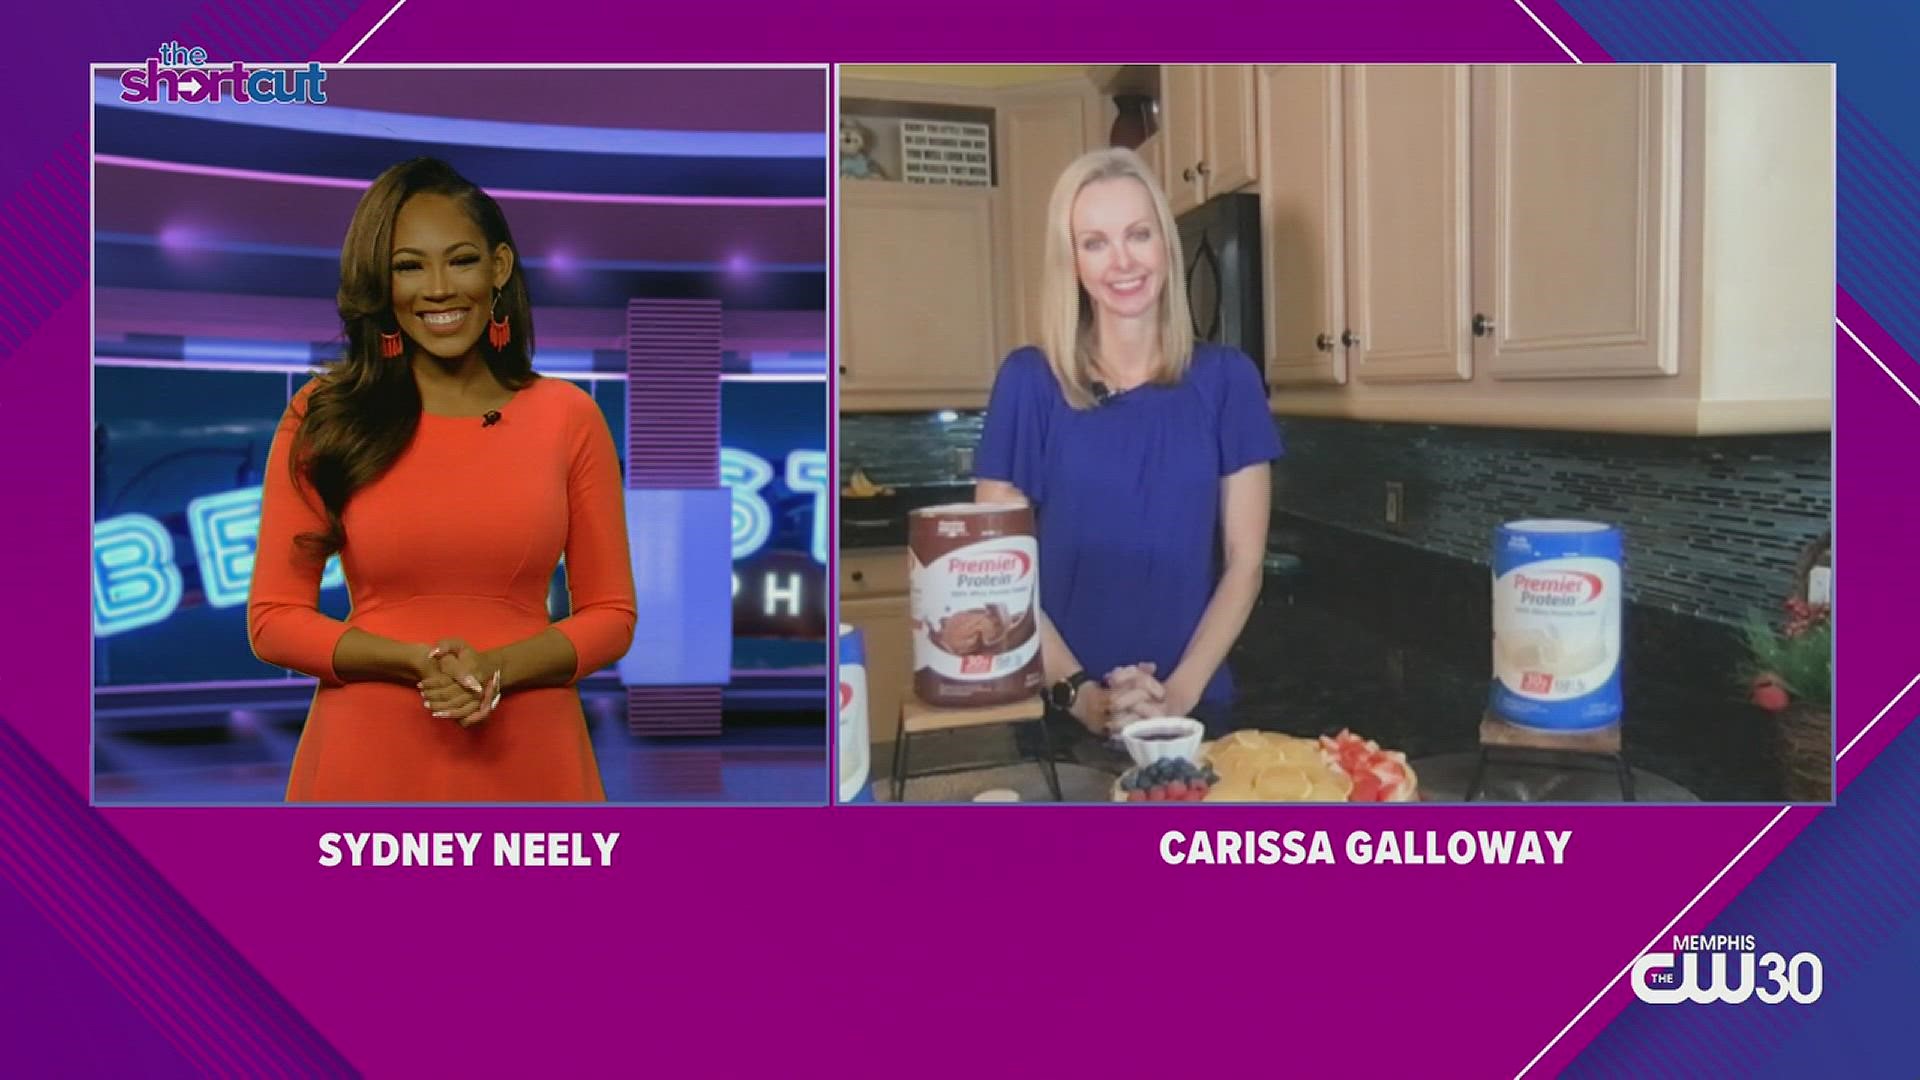 Looking to enjoy the holidays without breaking the health bank? Join host Sydney Neely and nutrition expert Carissa Galloway for tips on healthy holiday eating!